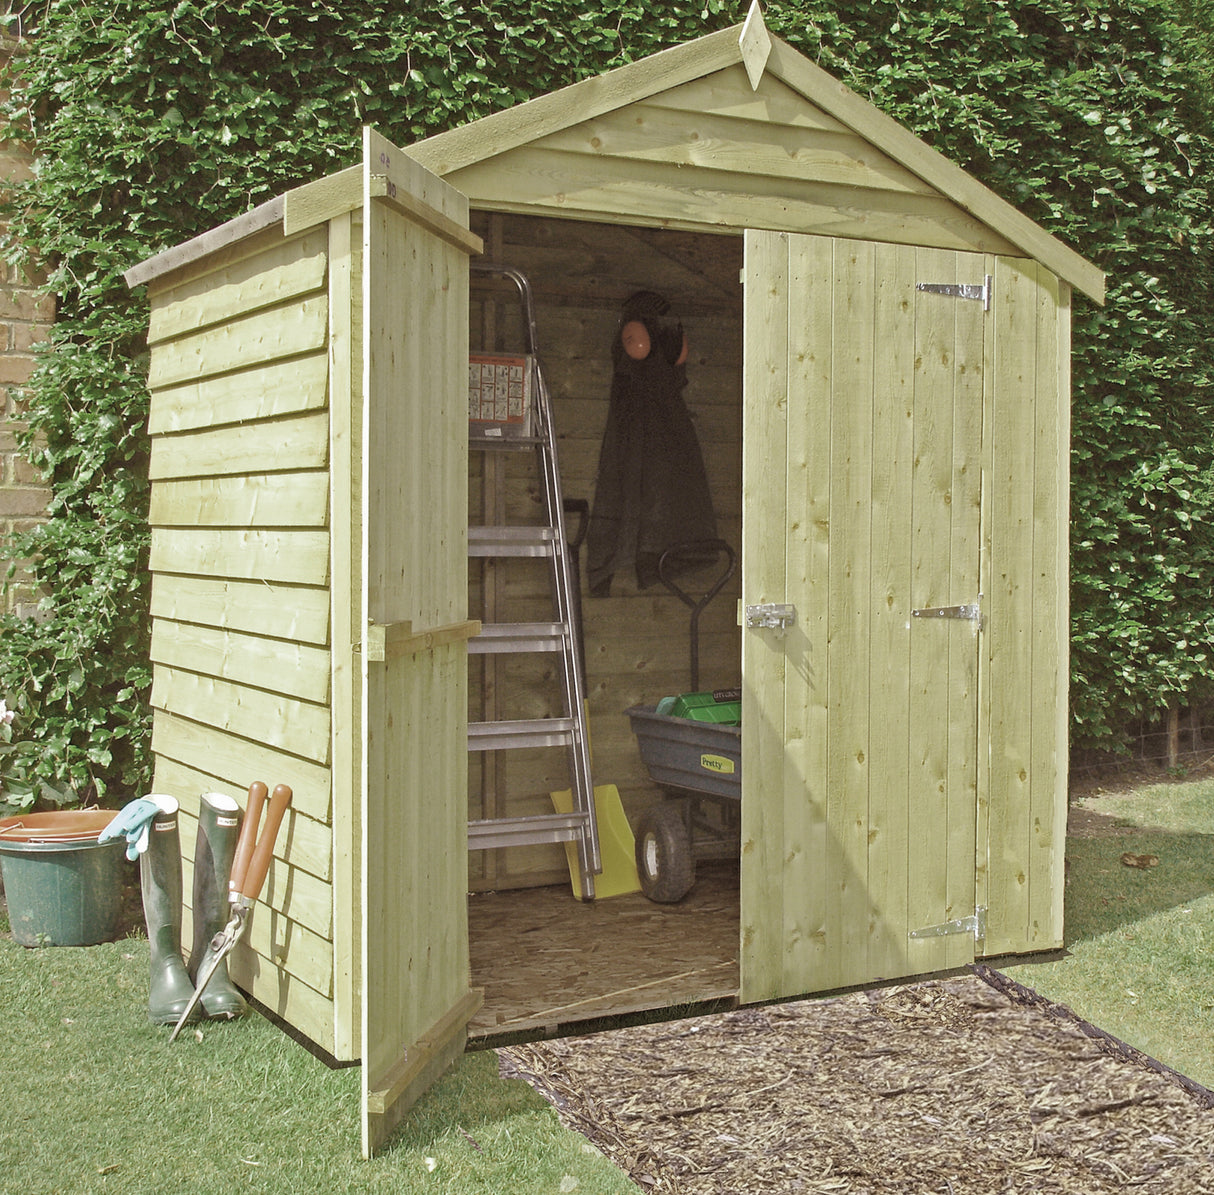 Shire Overlap Pressure Treated Shed 4x6